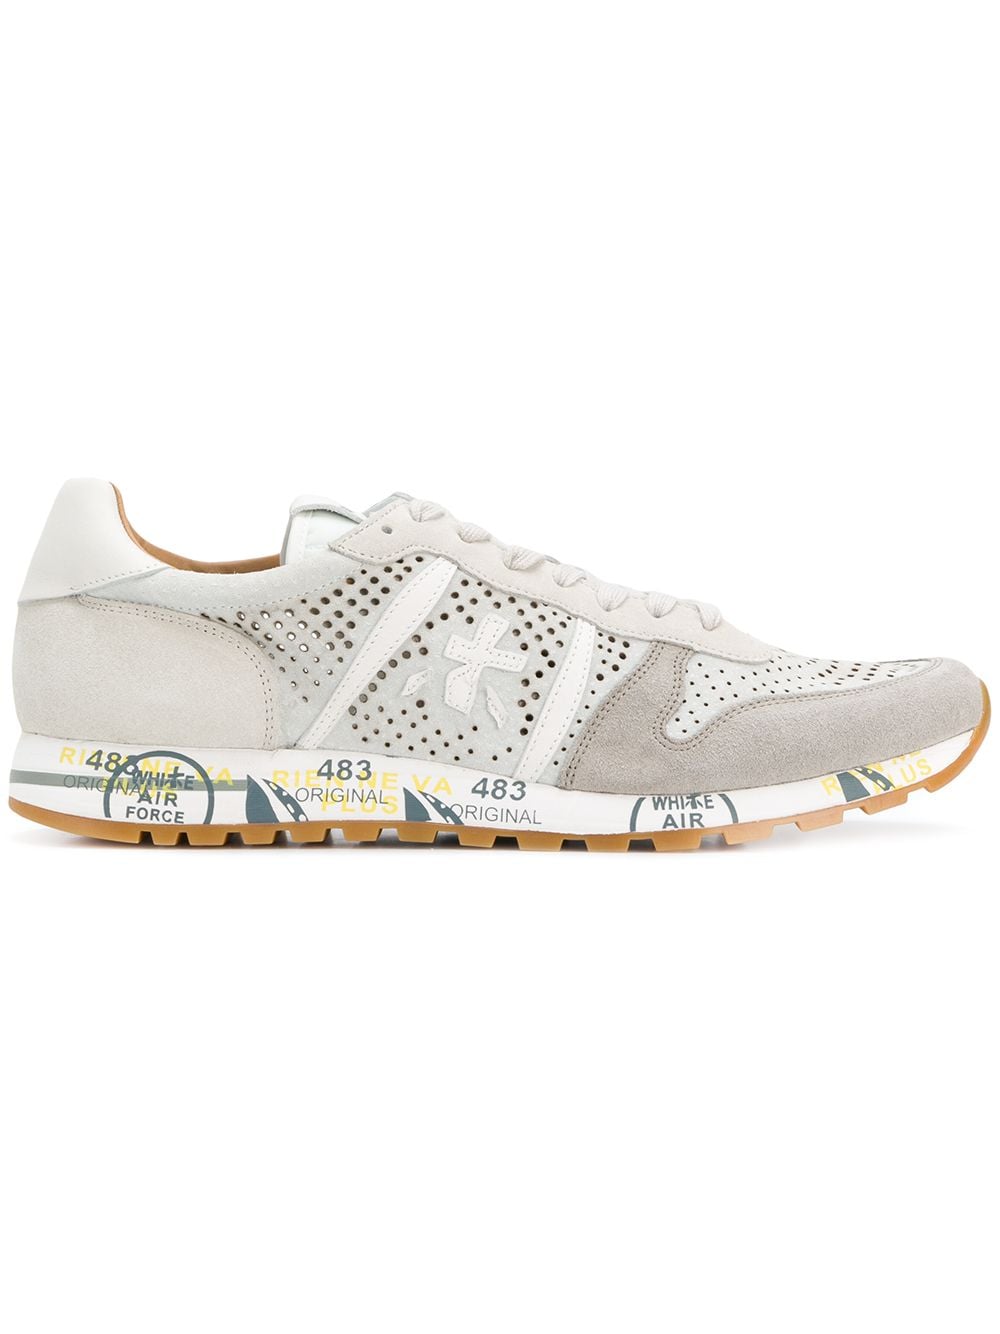 WHITE PREMIATA perforated lace-up sneakers,ERIC313912905024